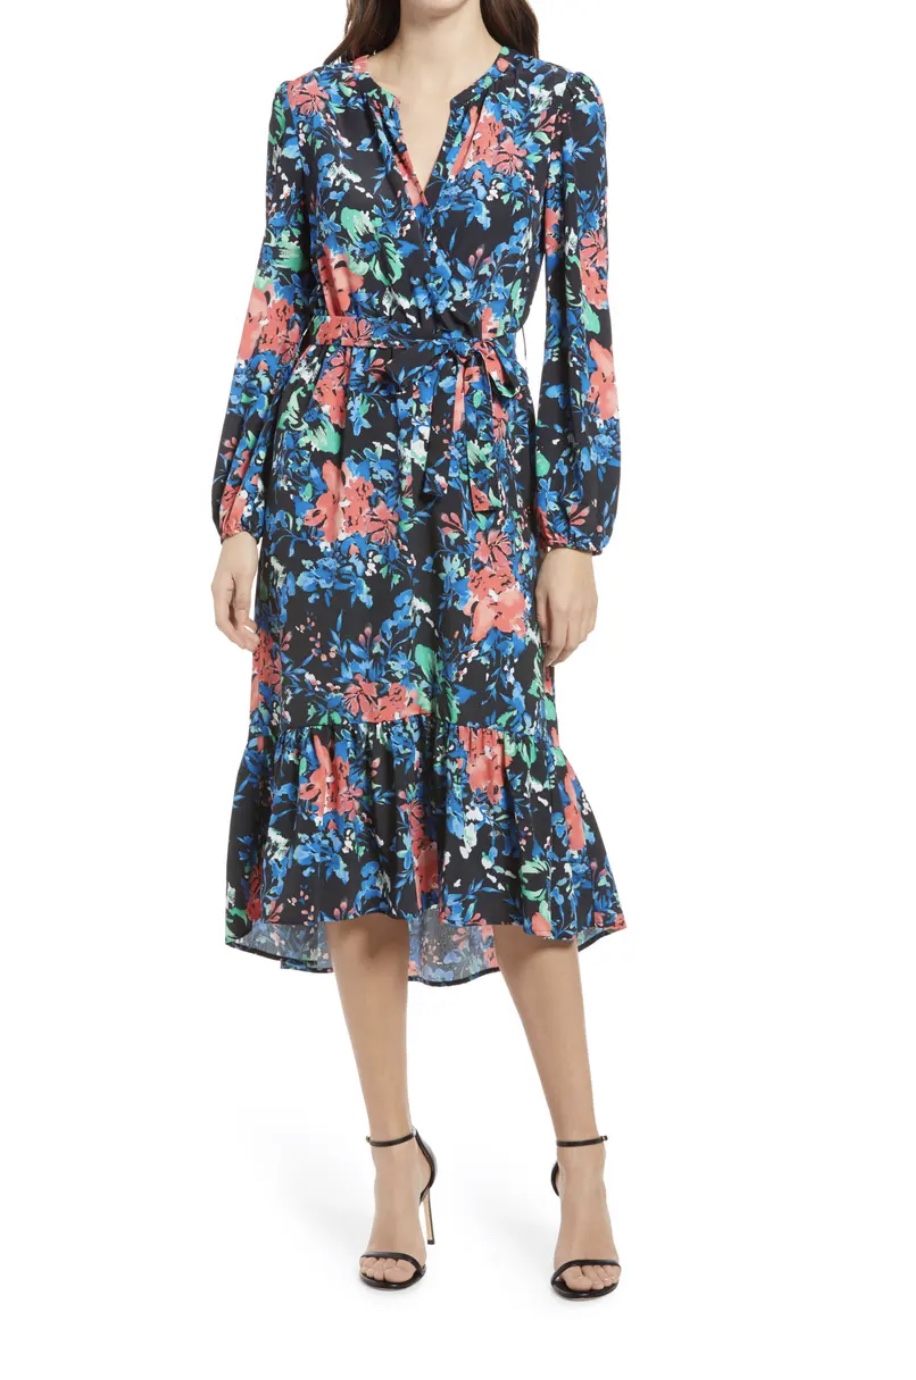 15 Spring Dresses Under $100 + Free Shipping - The Double Take Girls